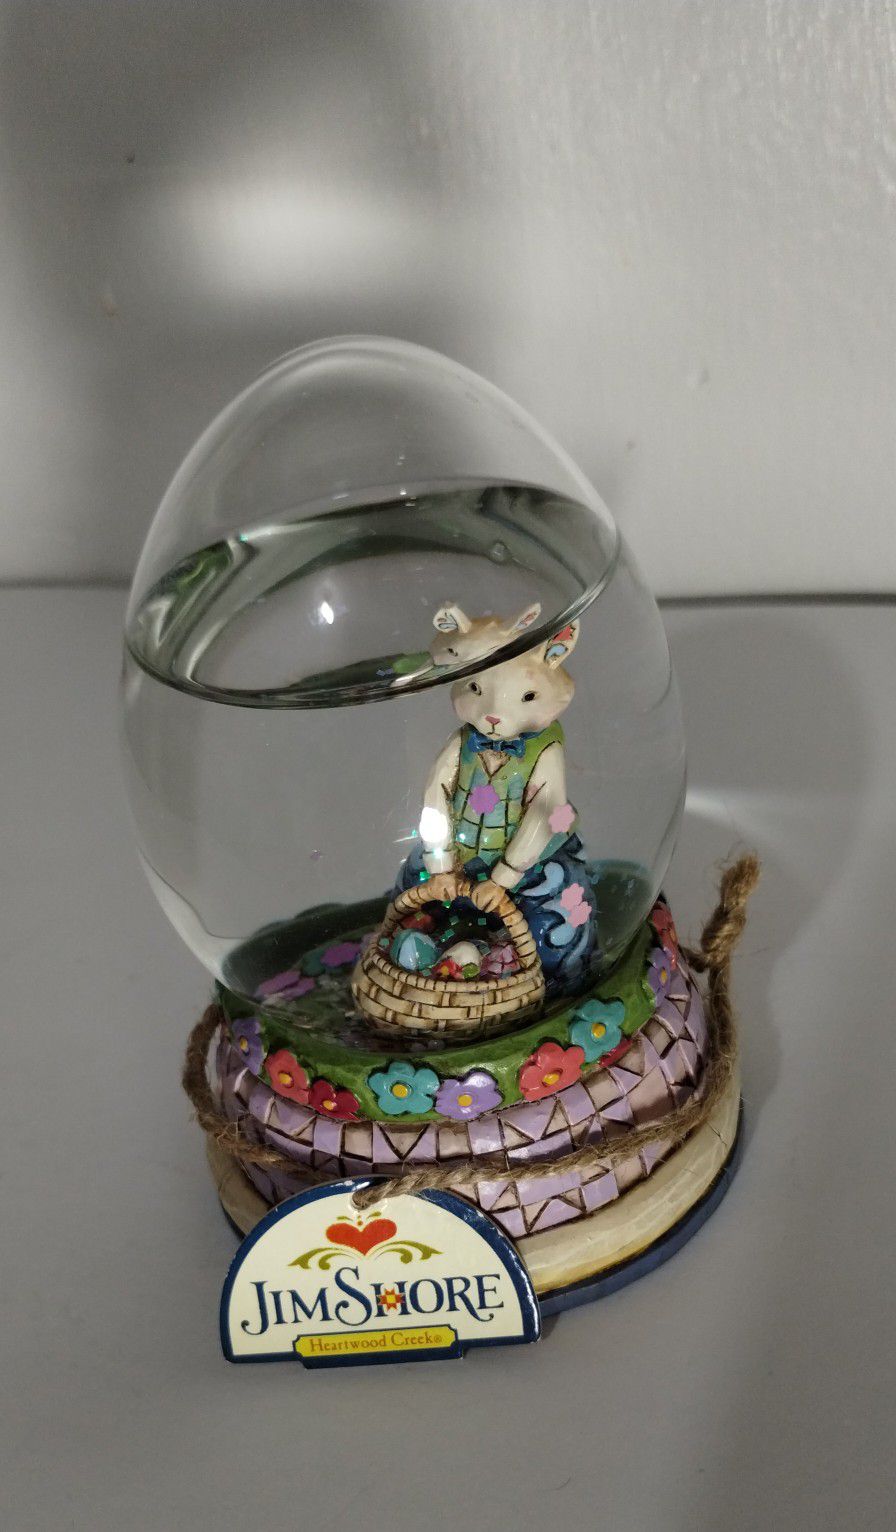 2008 JIM SHORE EGG PAPERWEIGHT 4.4"×2.5" - S94M94